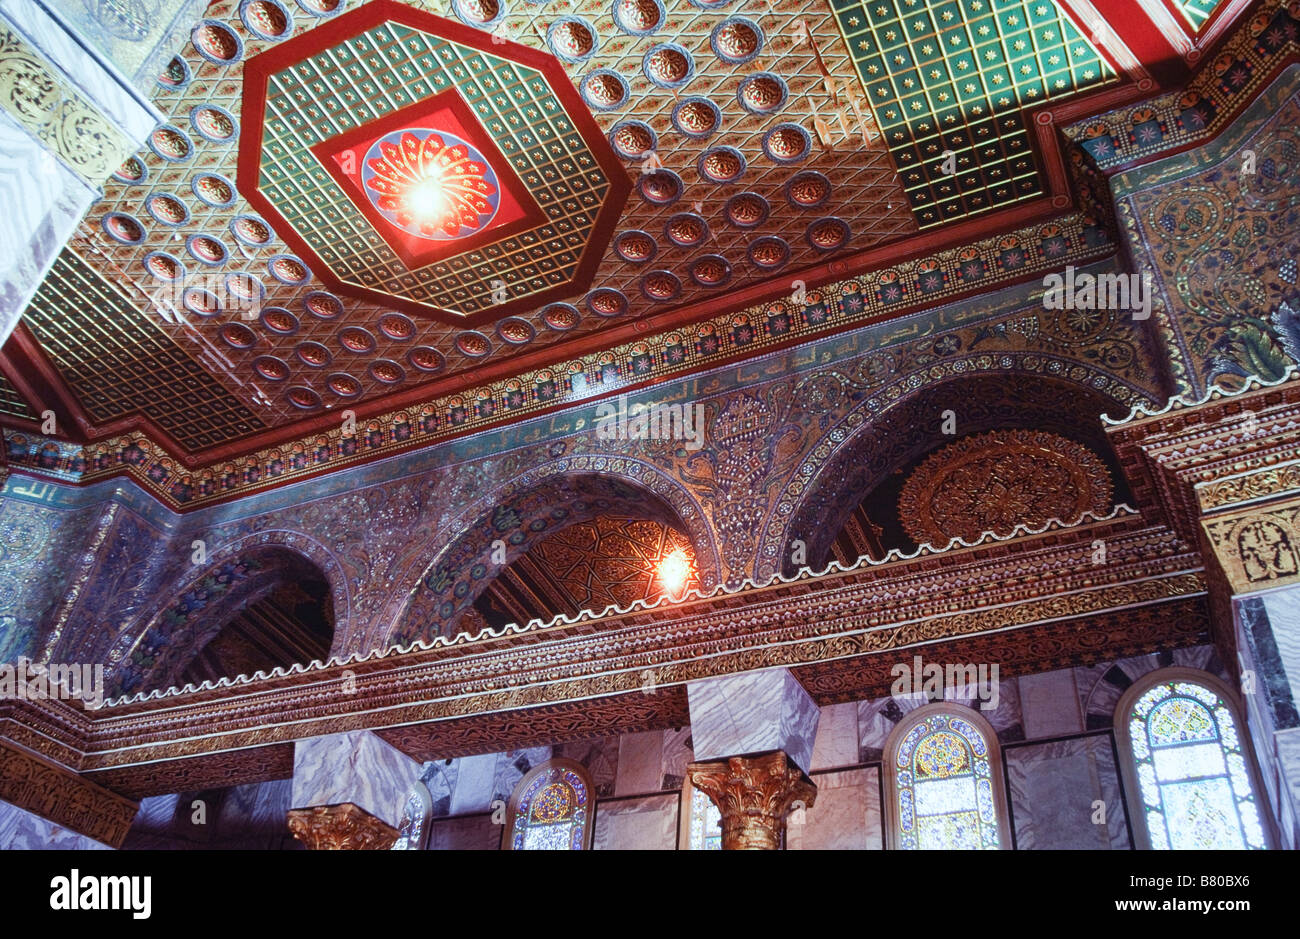 The Dome Of The Rock Jerusalem Interior Stock Photo